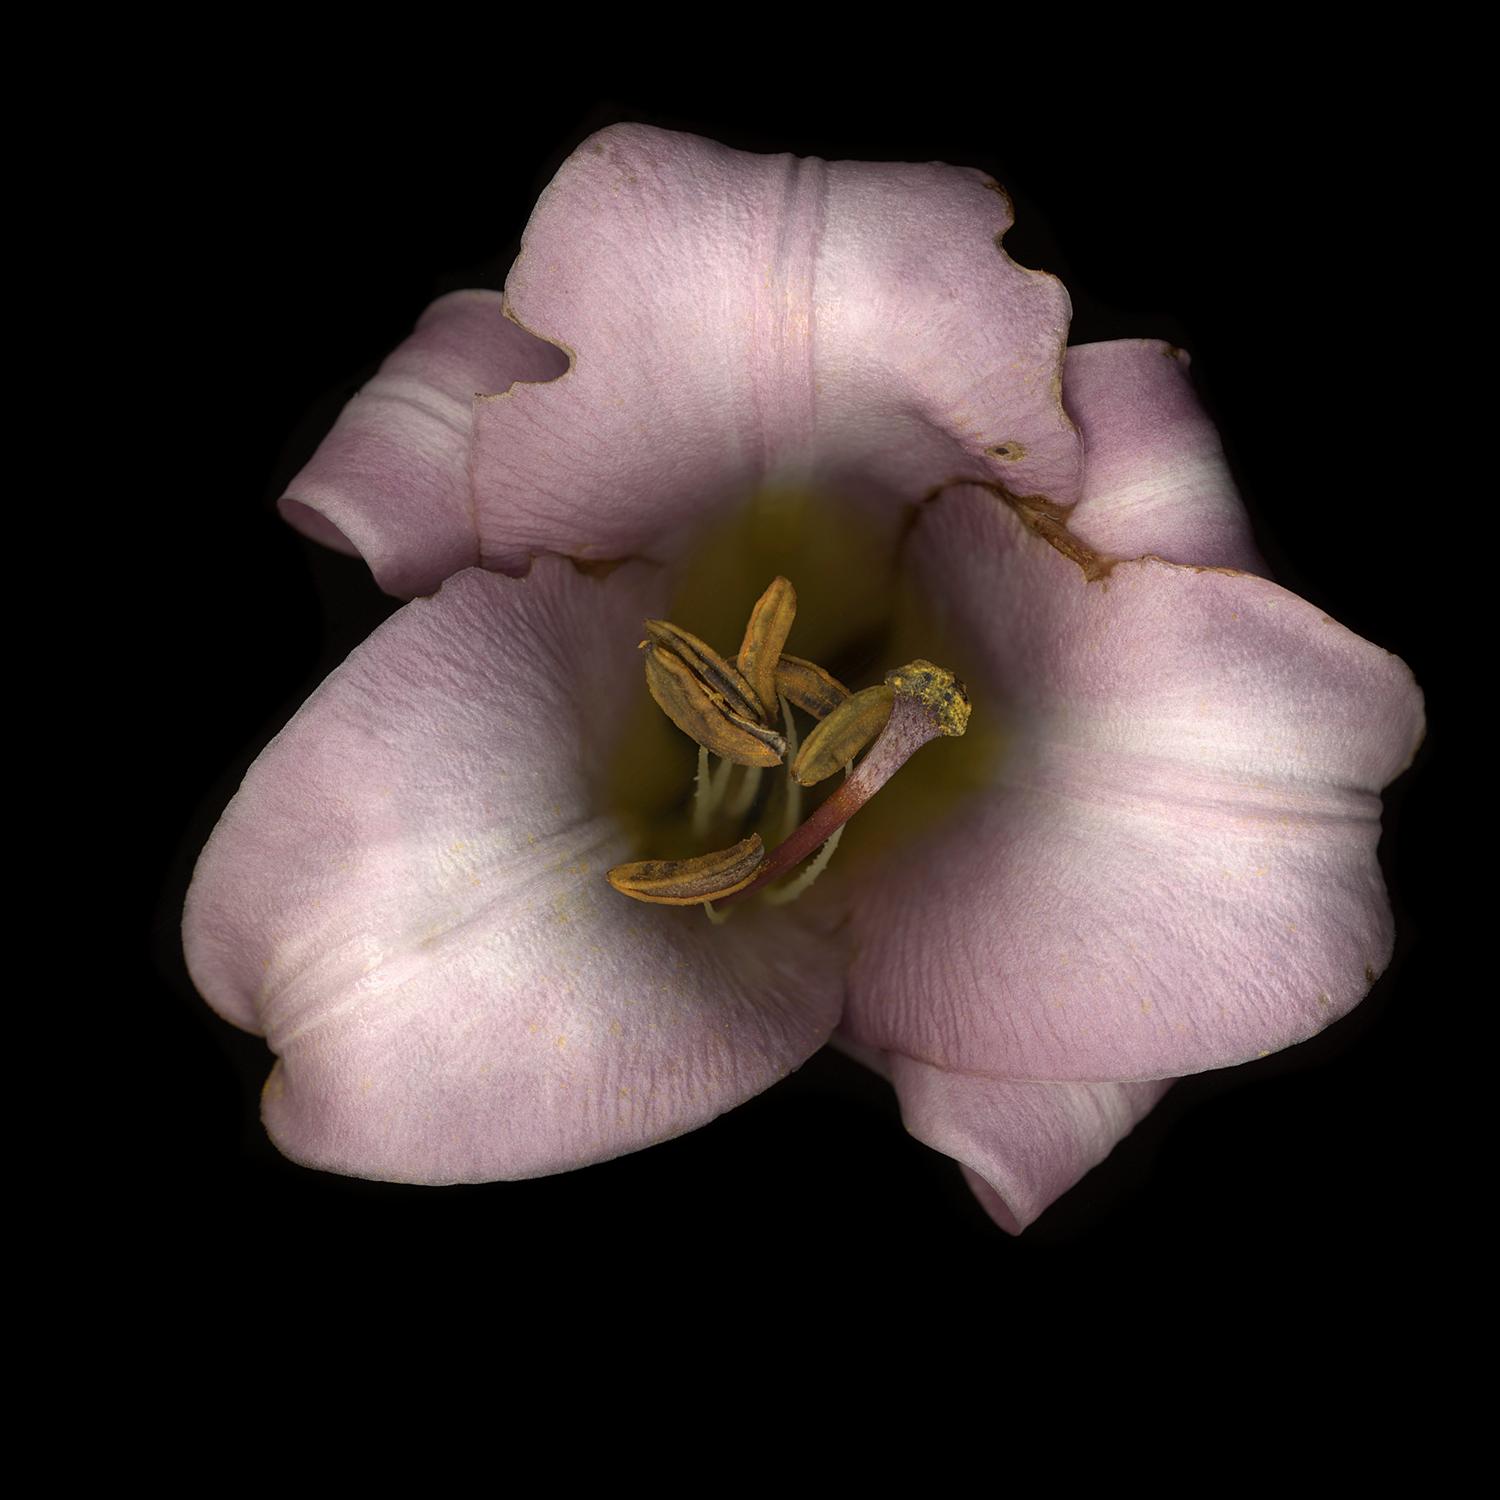 Untitled Flower # 16
Hahnemuhle Photo Rag Matte Paper with Epson archival quality ink
Edition of 25
Available sizes:
11" x 14”
20" x 24”
30" x 30”
30" x 40”
40" x 40"
48" x 48”
48" x 60”
60" x 60”

I began using a scanner as a camera in 1997 and